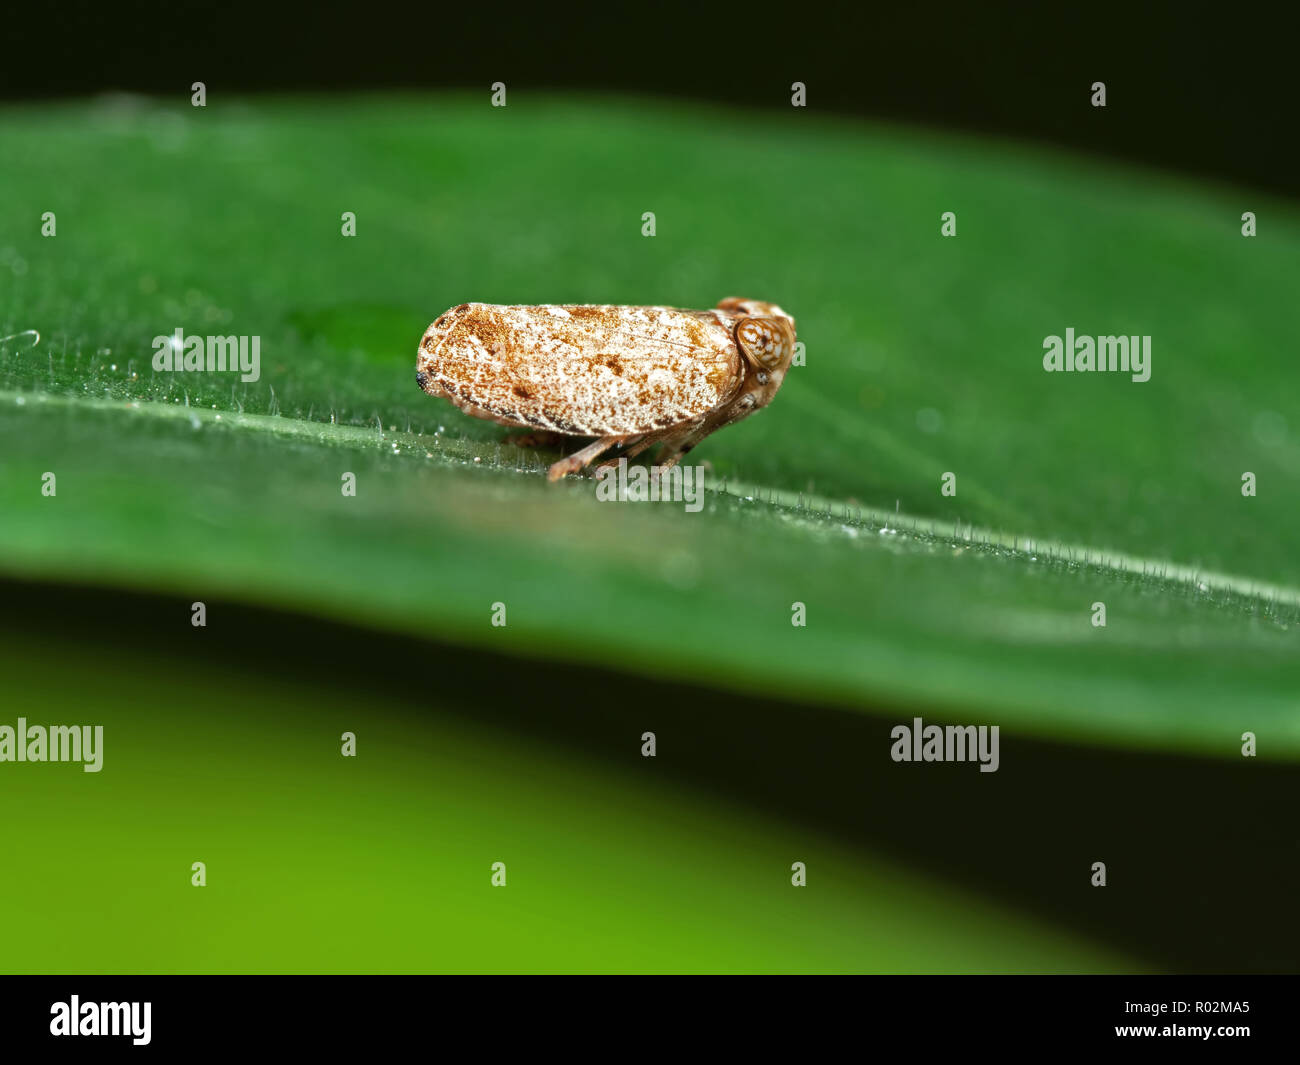 Macro Photography of Planthopper on Green Leaf Stock Photo